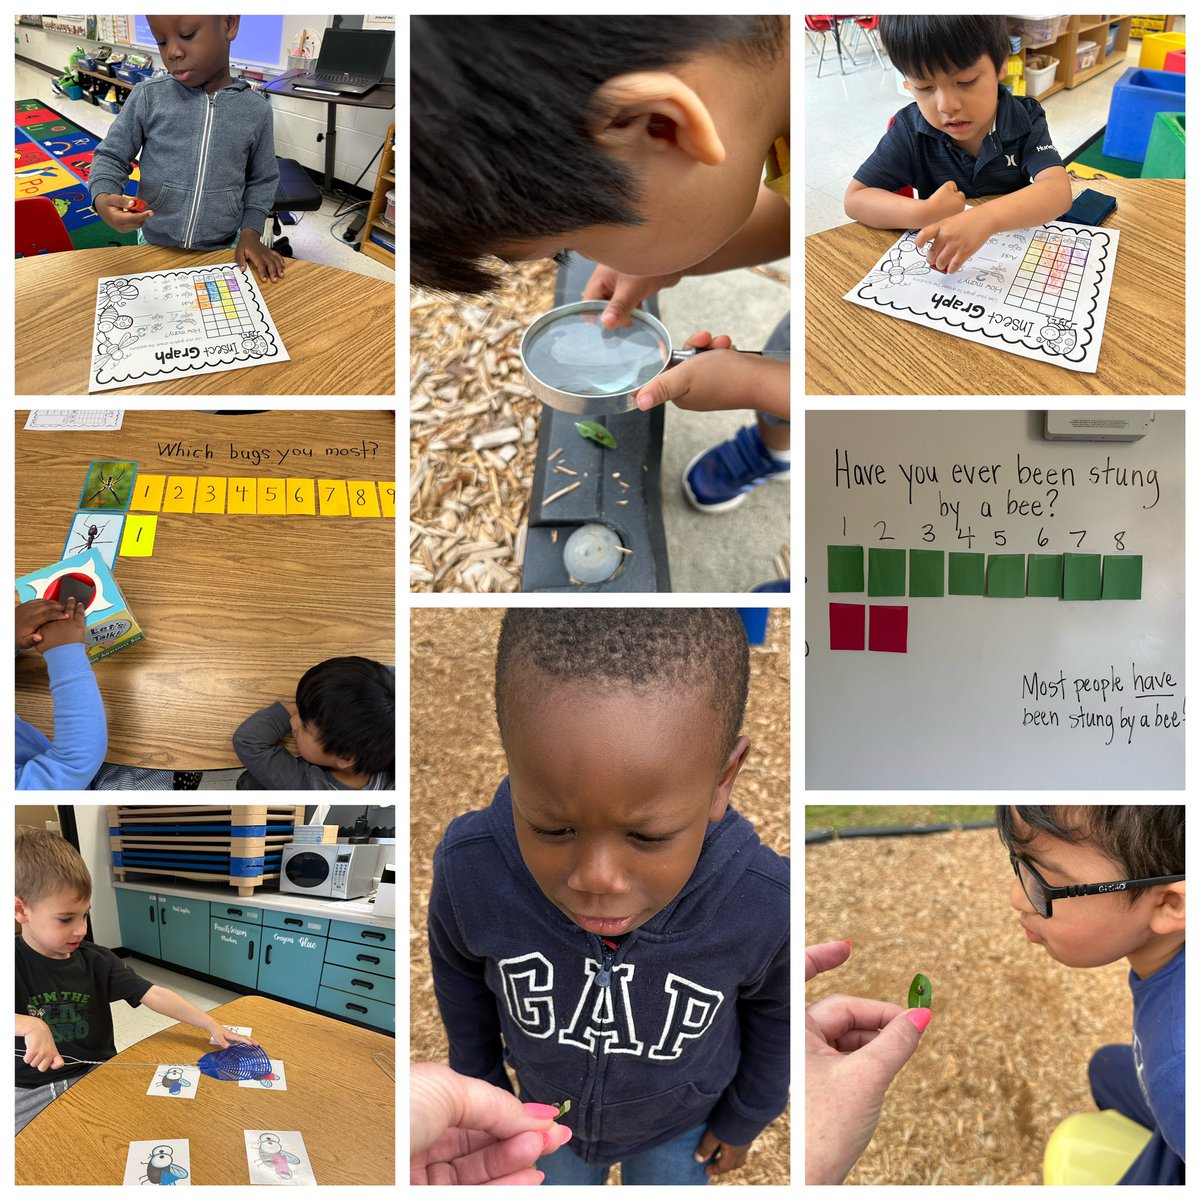 Insect Investigations! At our school, we are most “bugged”by spiders 🕷️ and most have been stung by a bee 🐝 @npepanthers @NPESprincipal @FCS_SEC